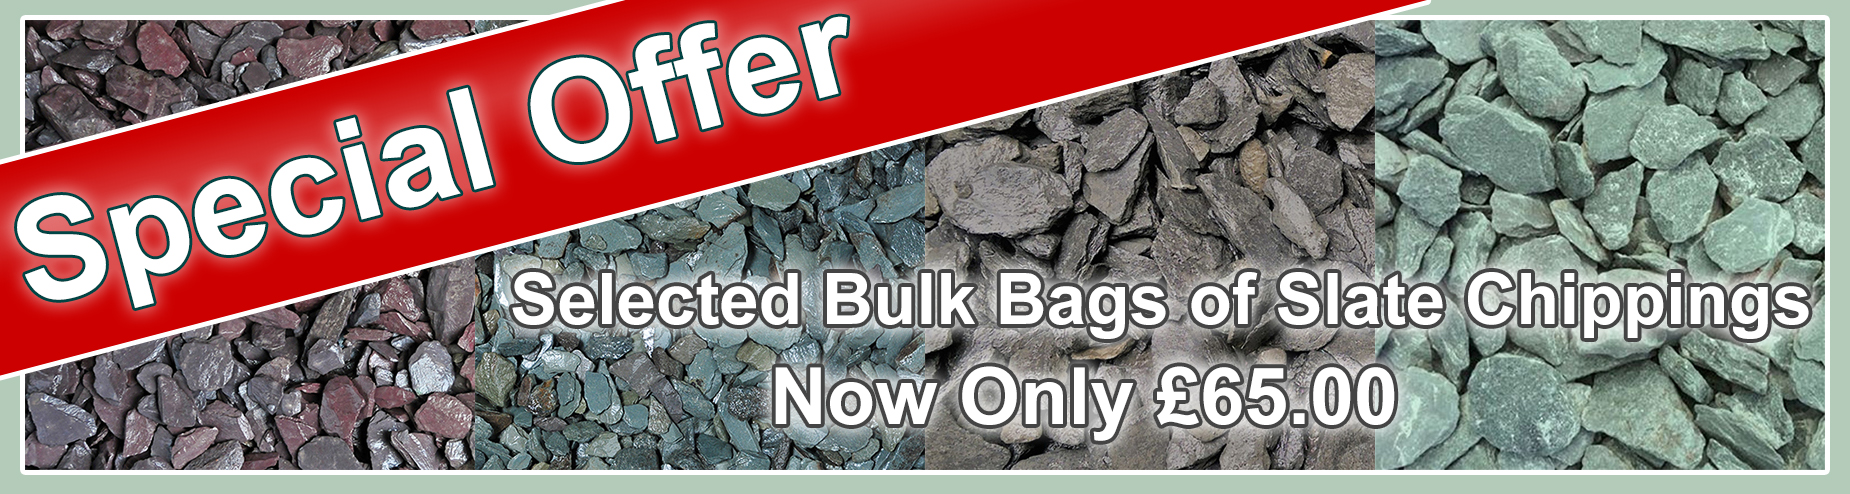 Special Offer on selected bulk bags of slate chippings